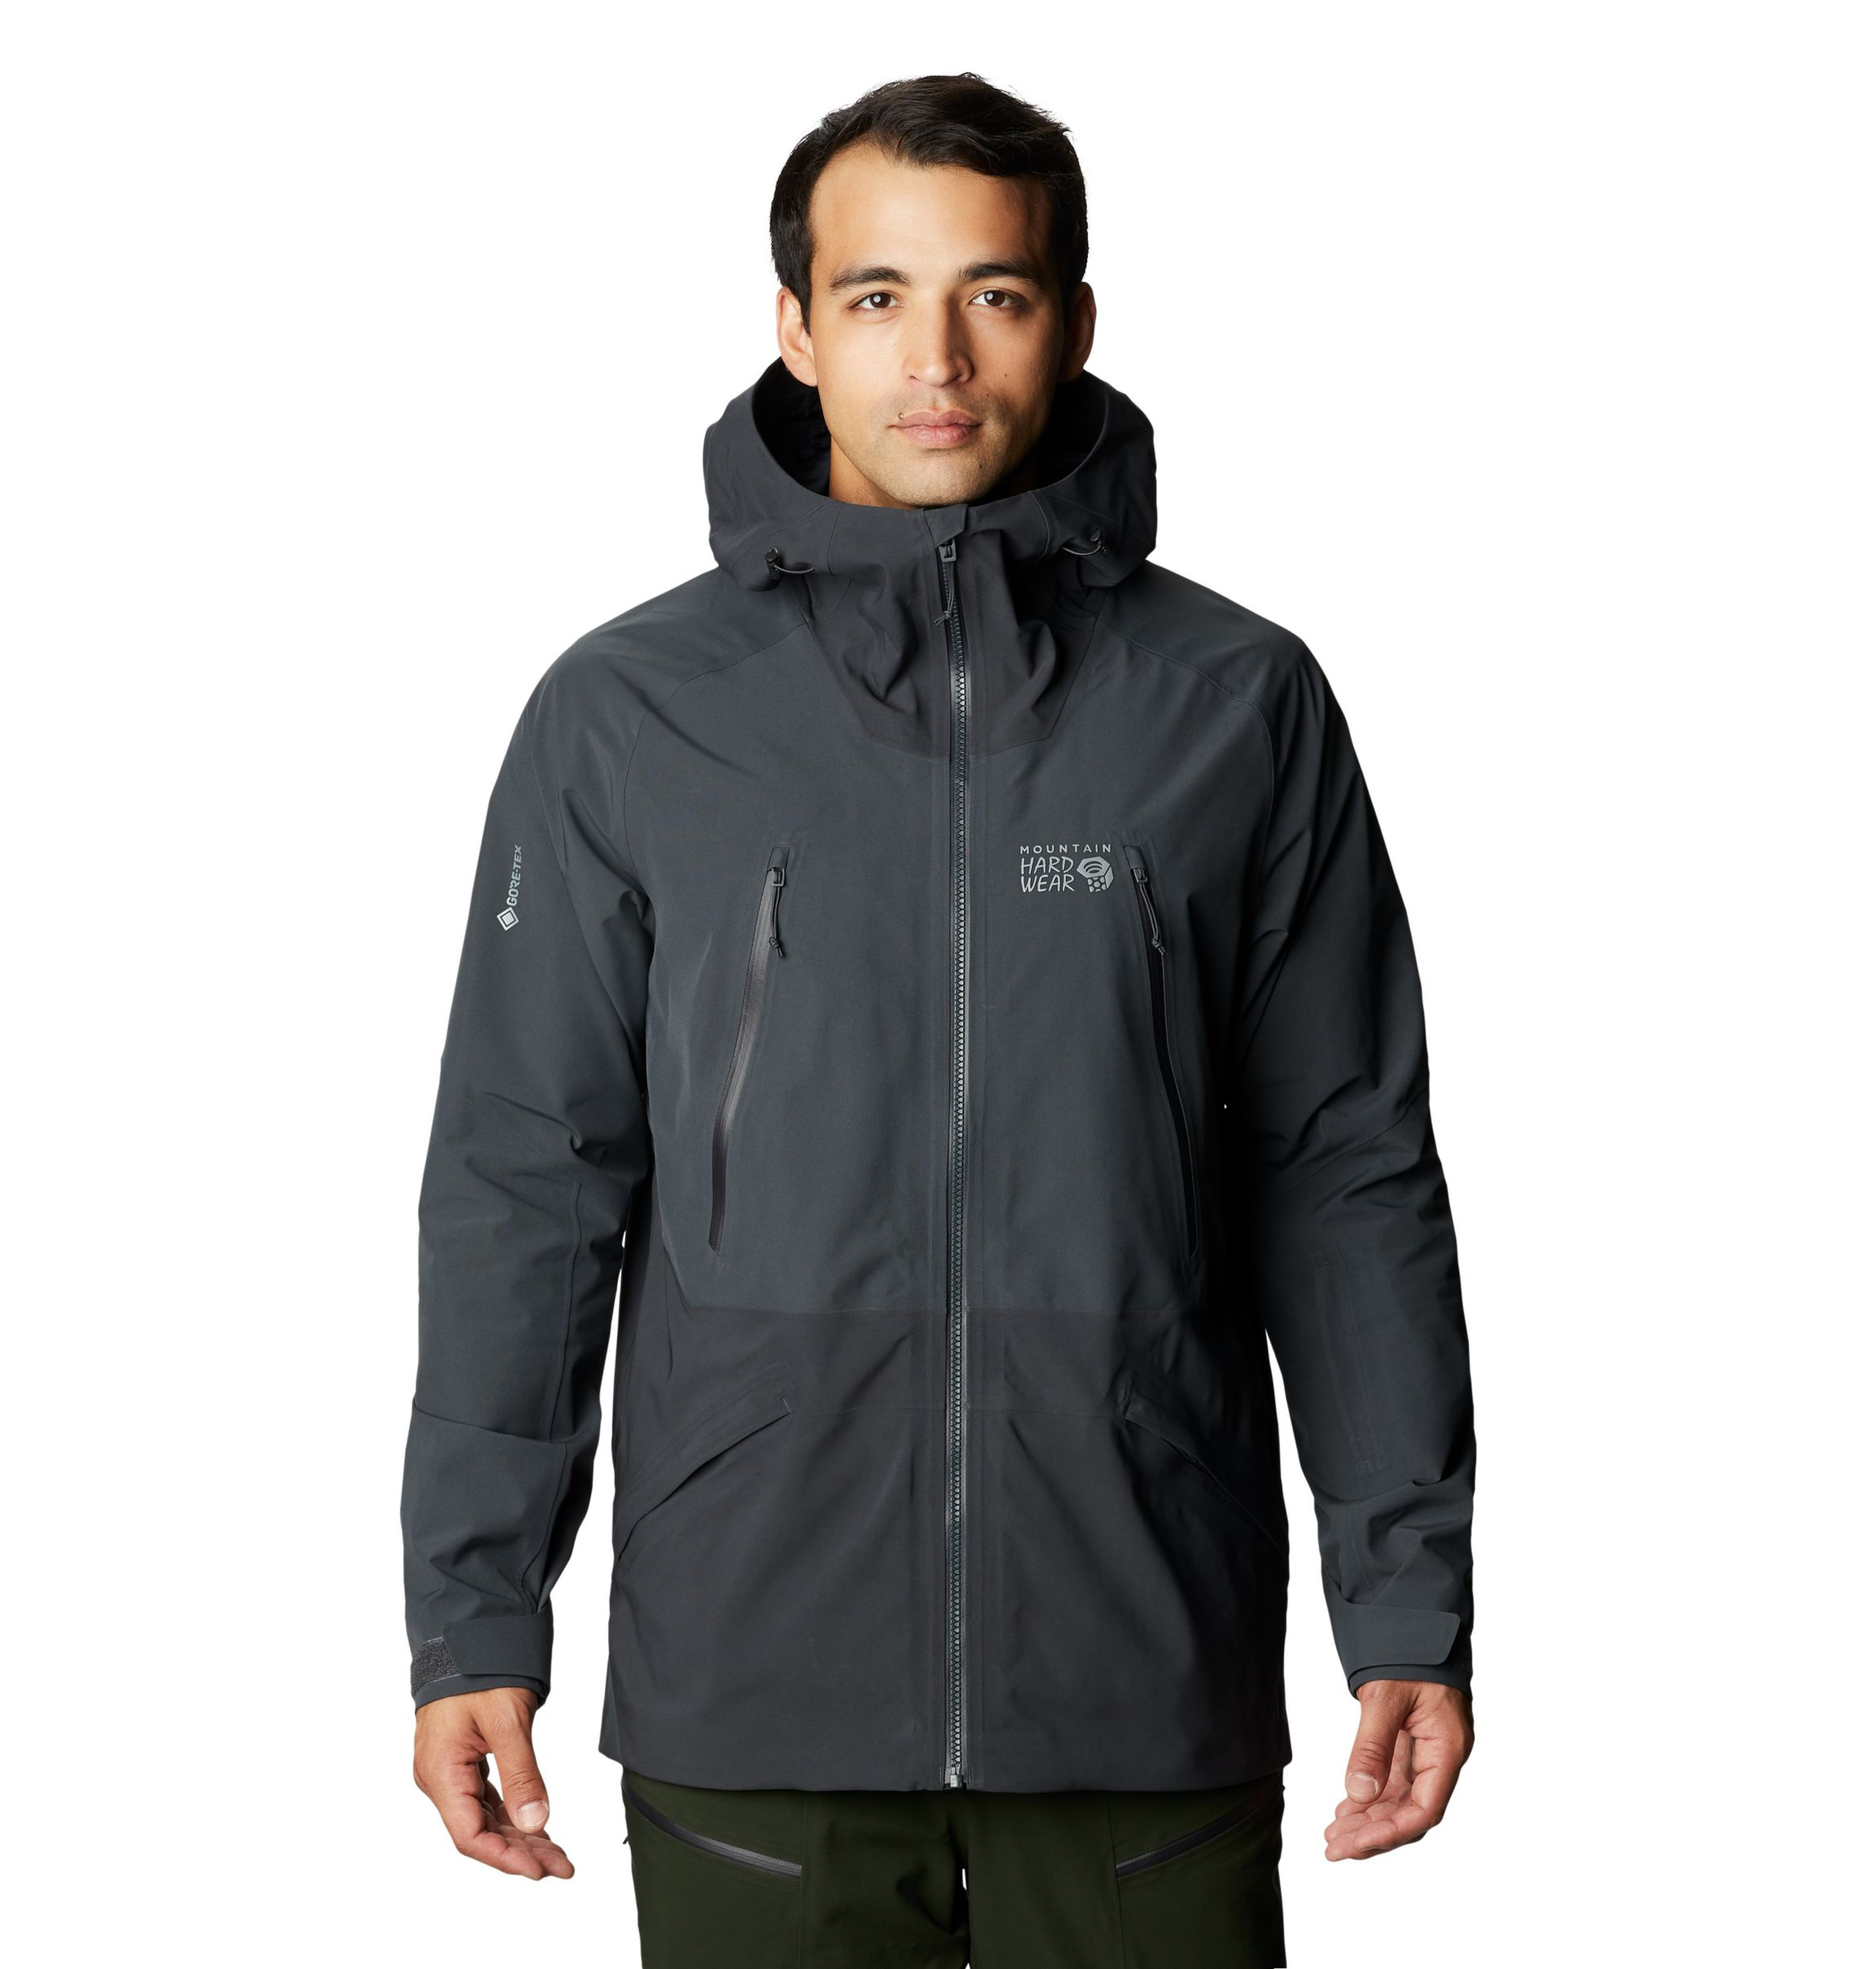 Mountain Hardwear Sky Ridge Gore Tex Jacket Men S Up To 48 Off With Free S H Campsaver